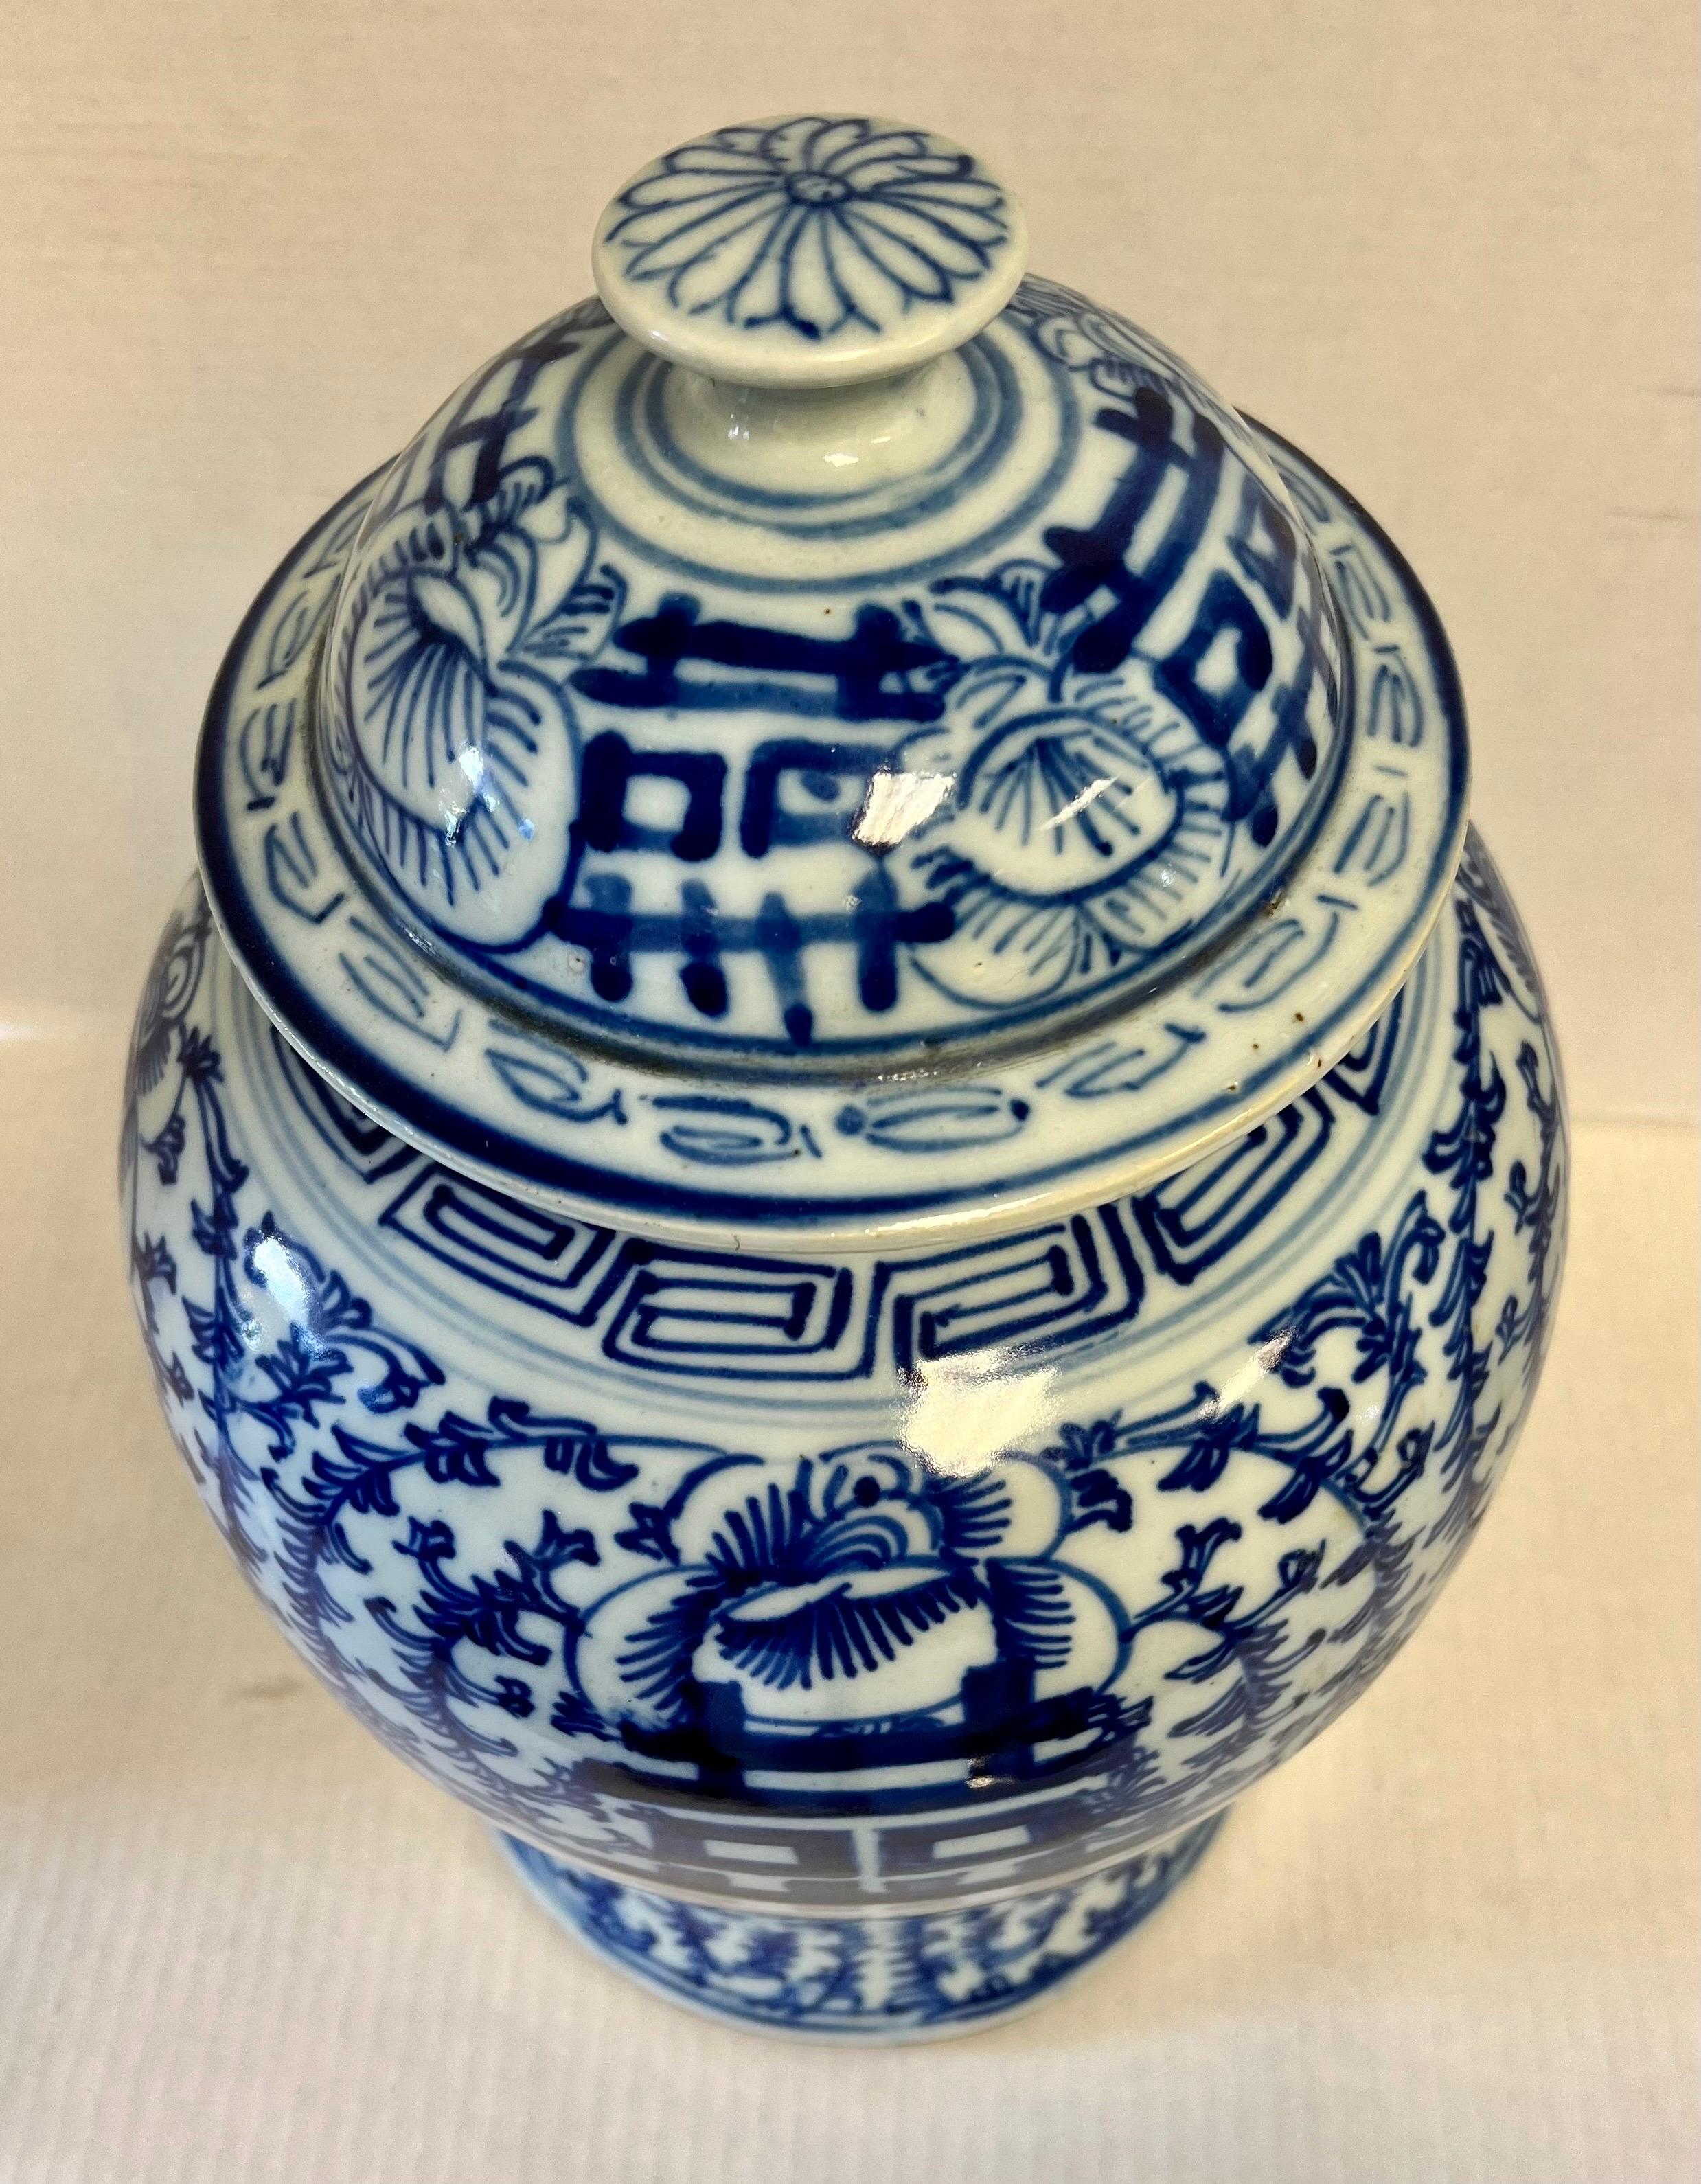 Large Chinese porcelain vase with hand-painted decoration in cobalt blue. The body of the vase is covered with floral designs and geometric decorations. At the center of the vase is an important ideogram, a sort of wish for luck, happiness, and